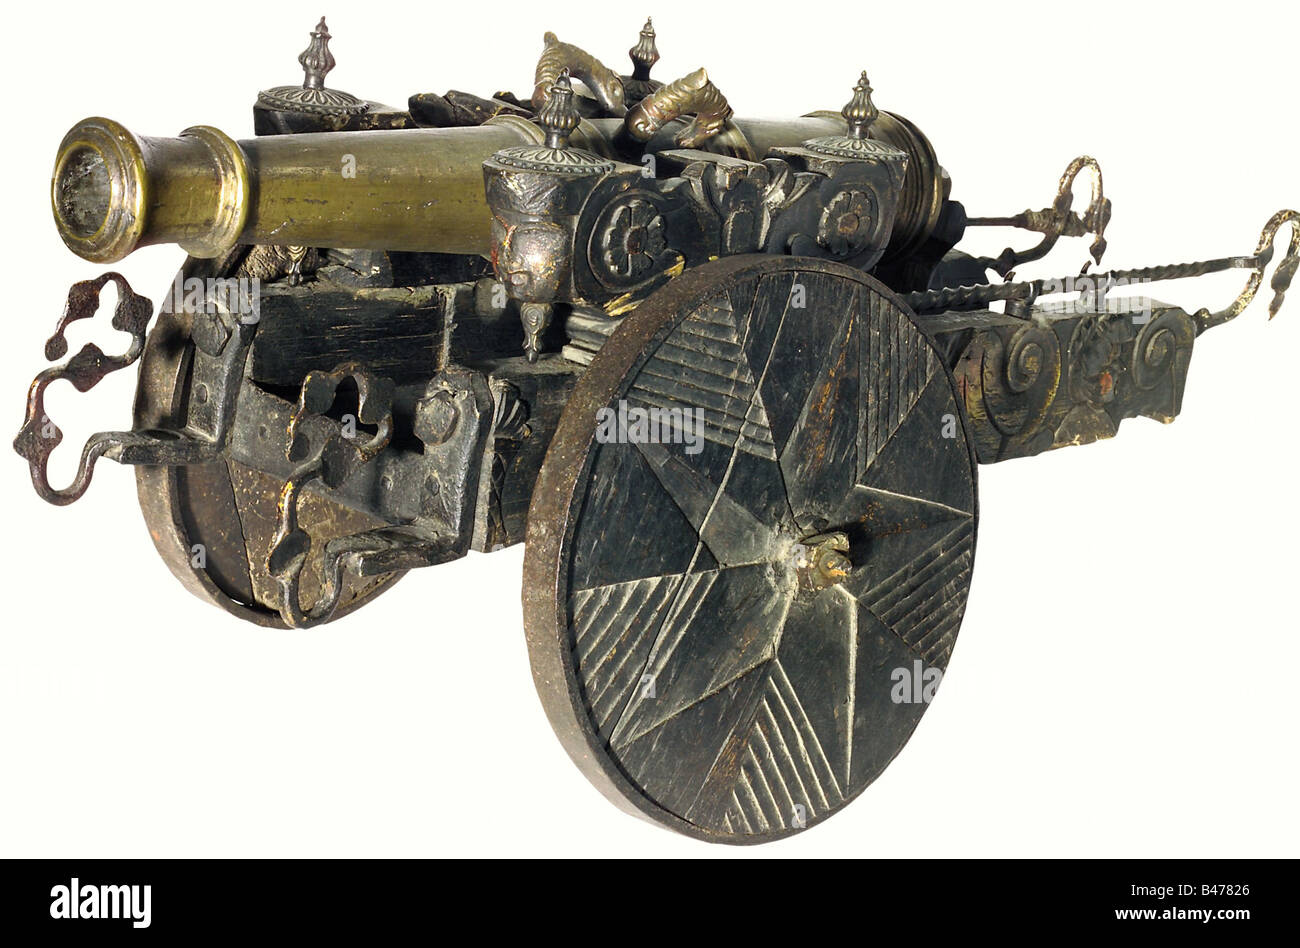 A model cannon, China, circa 1900. A heavy bronze barrel with a reinforced muzzle and breech. Touchhole on top with two dolphin-shaped handles. Barrel length 73 cm. Darkly finished, carved wooden carriage with iron furniture, full wooden wheels with star-shaped decoration, and iron loading tools. Total length 112 cm. historic, historical, 19th century, Far East, Far Eastern, weapon, arms, weapons, arms, military, militaria, clipping, cut out, cut-out, cut-outs, object, objects, stills, Stock Photo